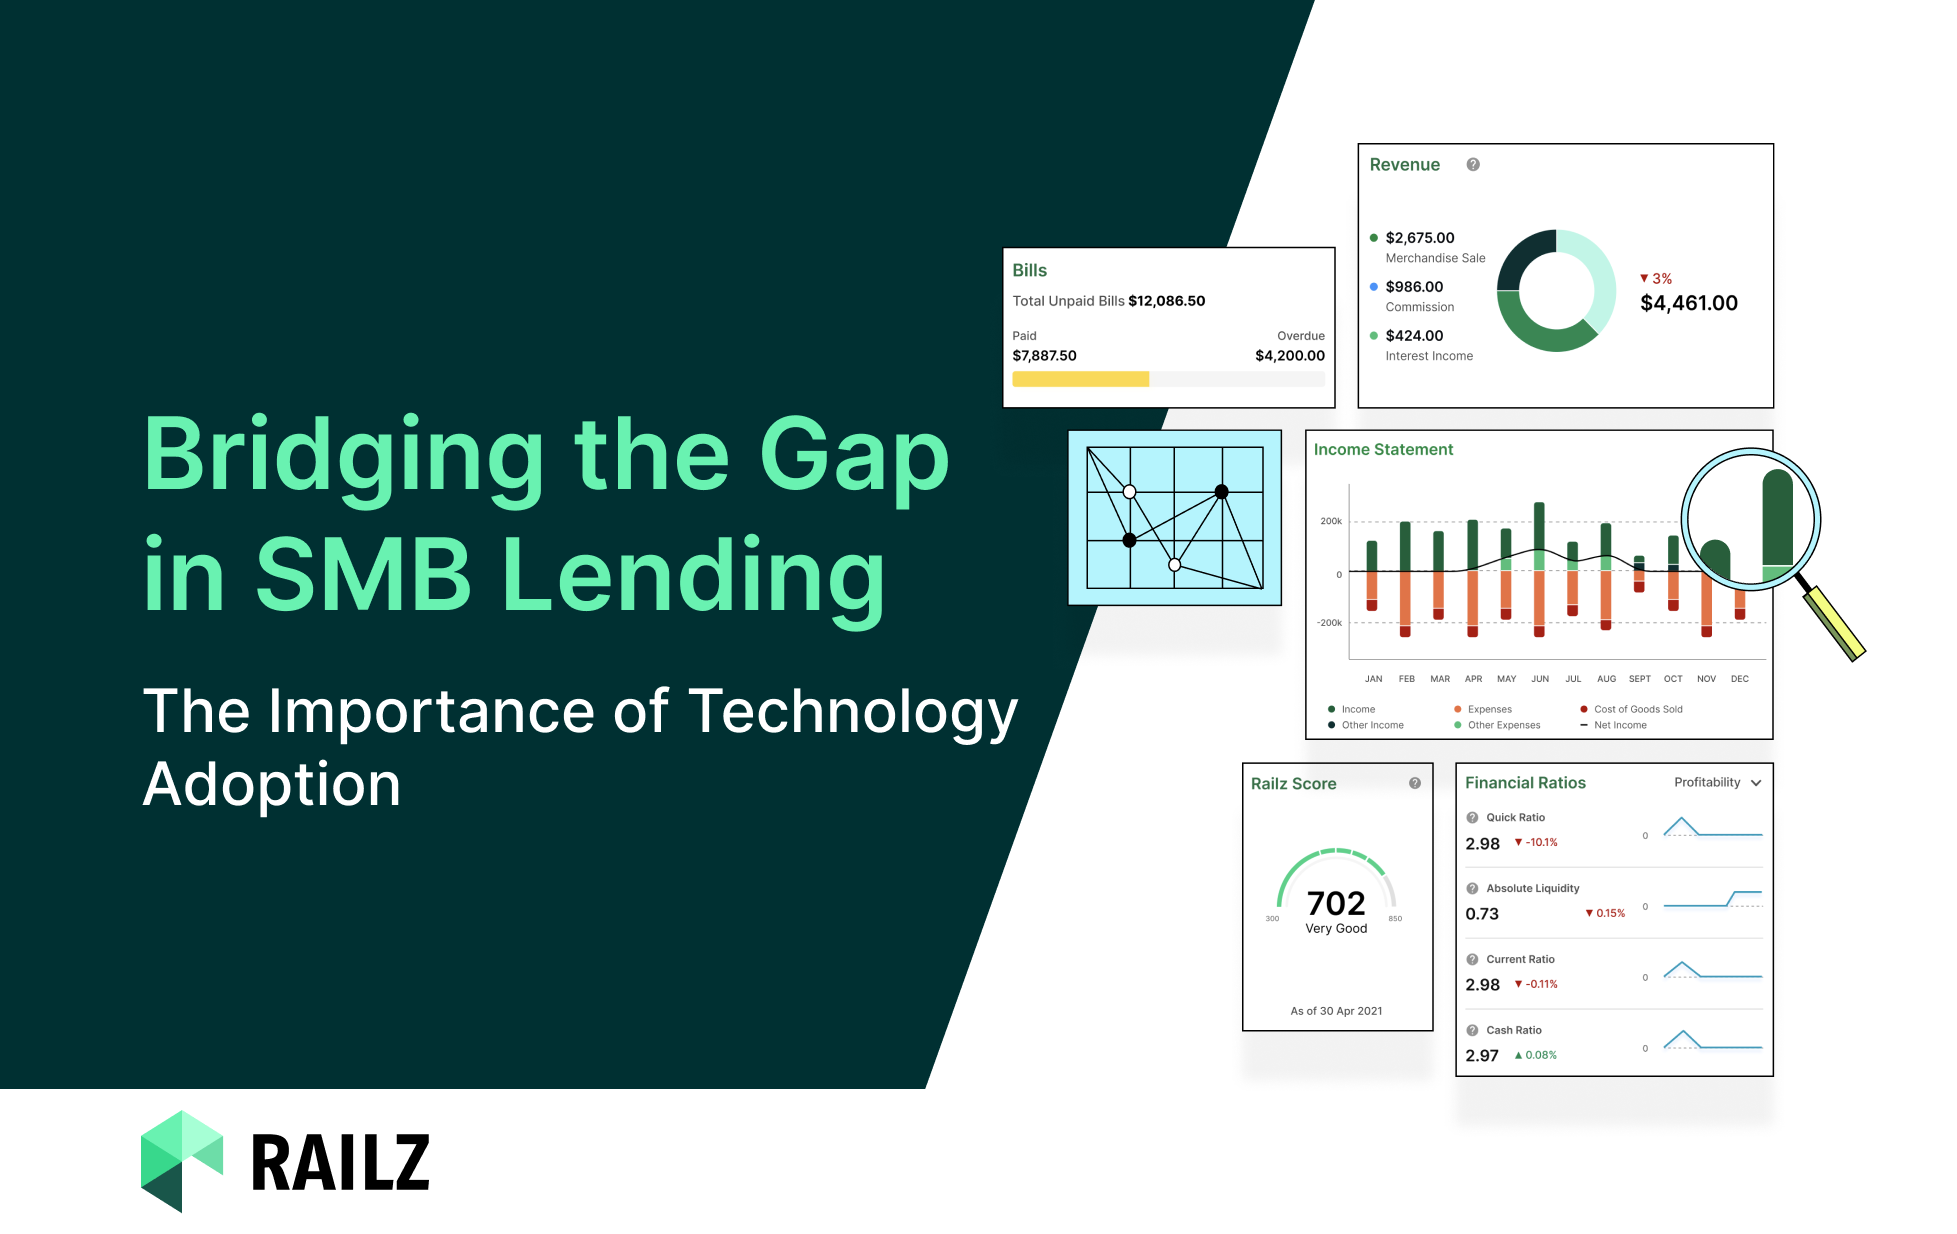 Bridging the Gap in SMB Lending - The Importance of Technology Adoption